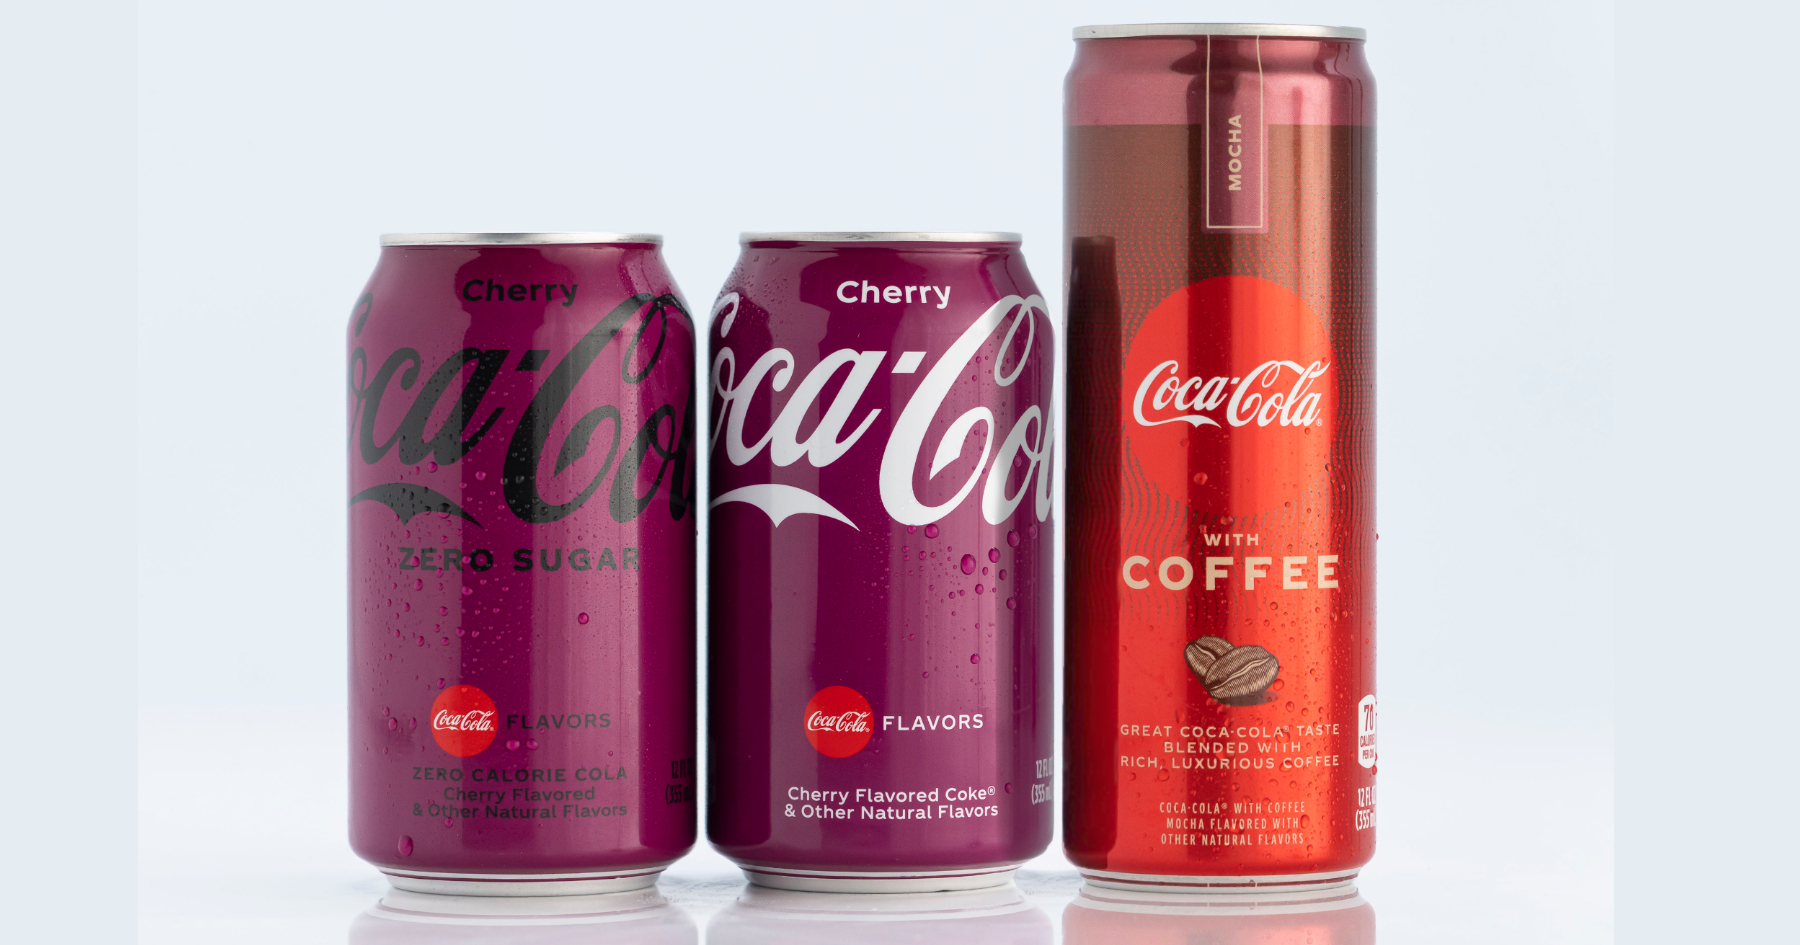 Coke Debuts New Can Designs, Highlighting Flavor Portfolio Food Manufacturing